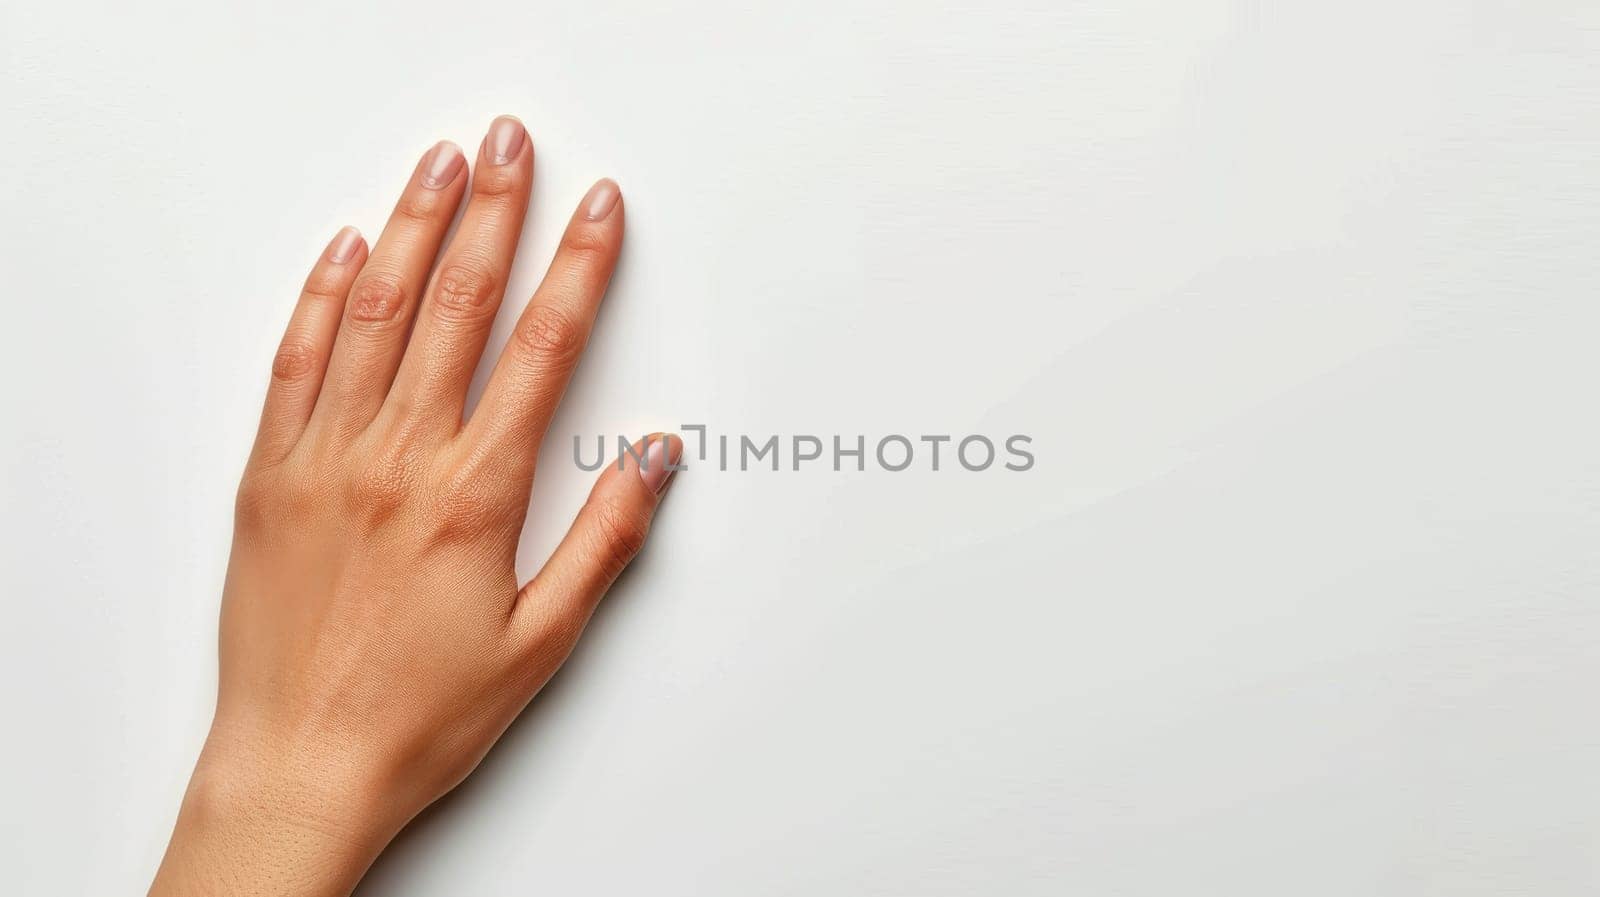 Two hands with nails painted in a light pink color by itchaznong